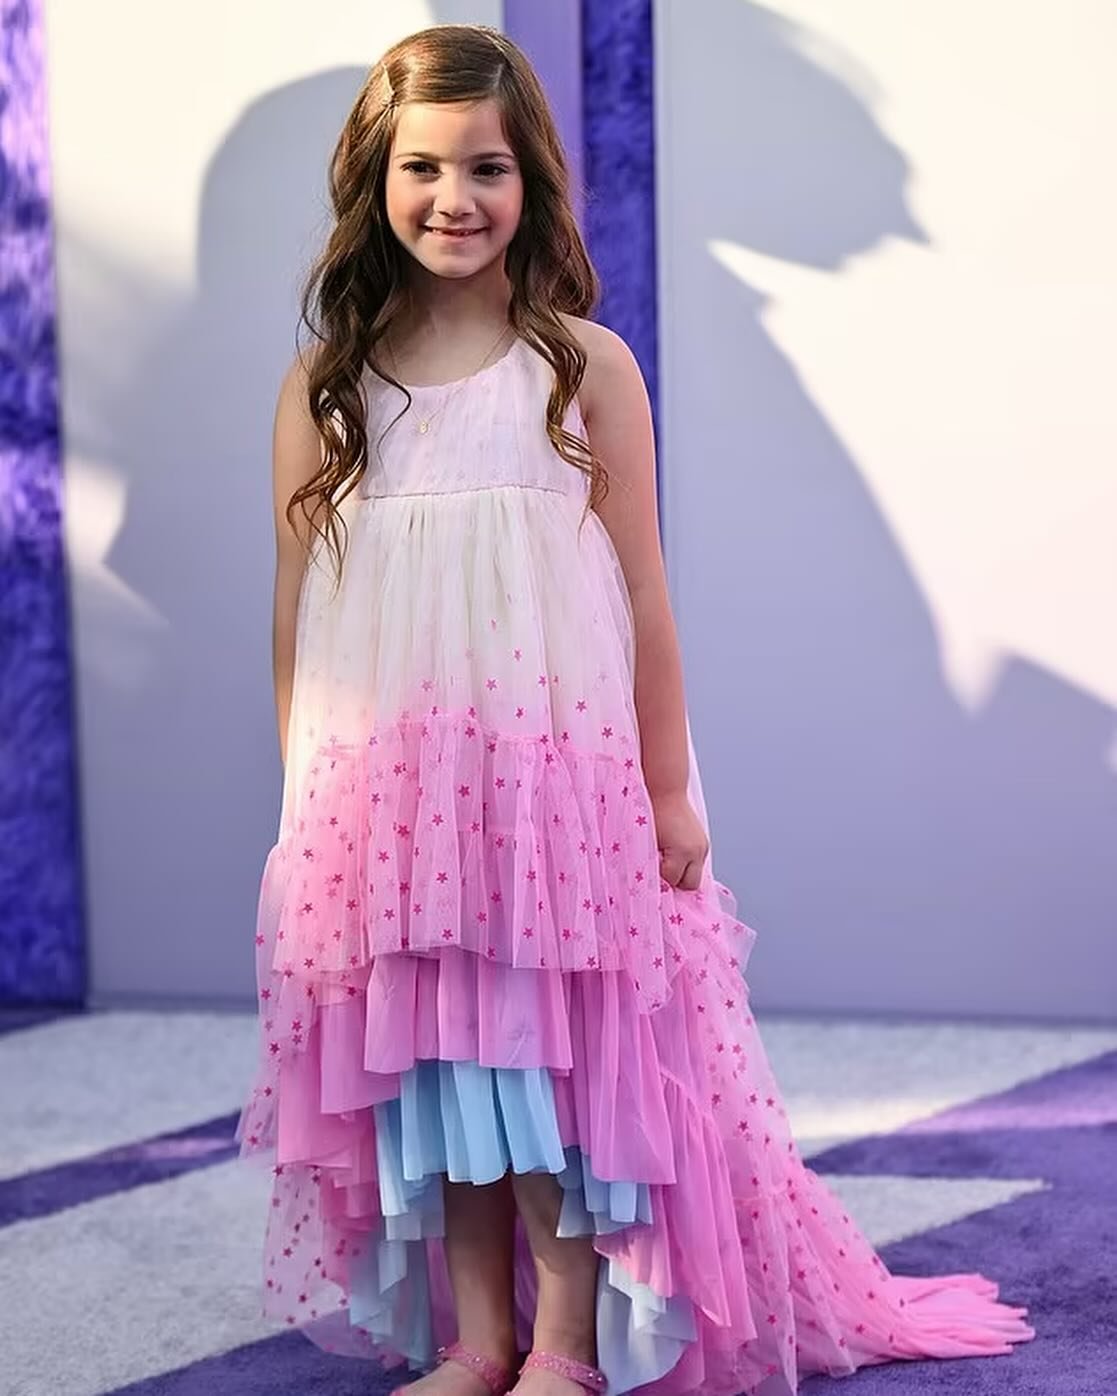 Audrey&rsquo;s first red carpet for @ifmovie 💜

Makeup and hair by me using @makeupforever @cerave moisturizer @veilcosmetics @oribepro and @hottoolspro waver and @byartis brushes

Thank you @juliehoffmanphotography and her beautiful family for ever